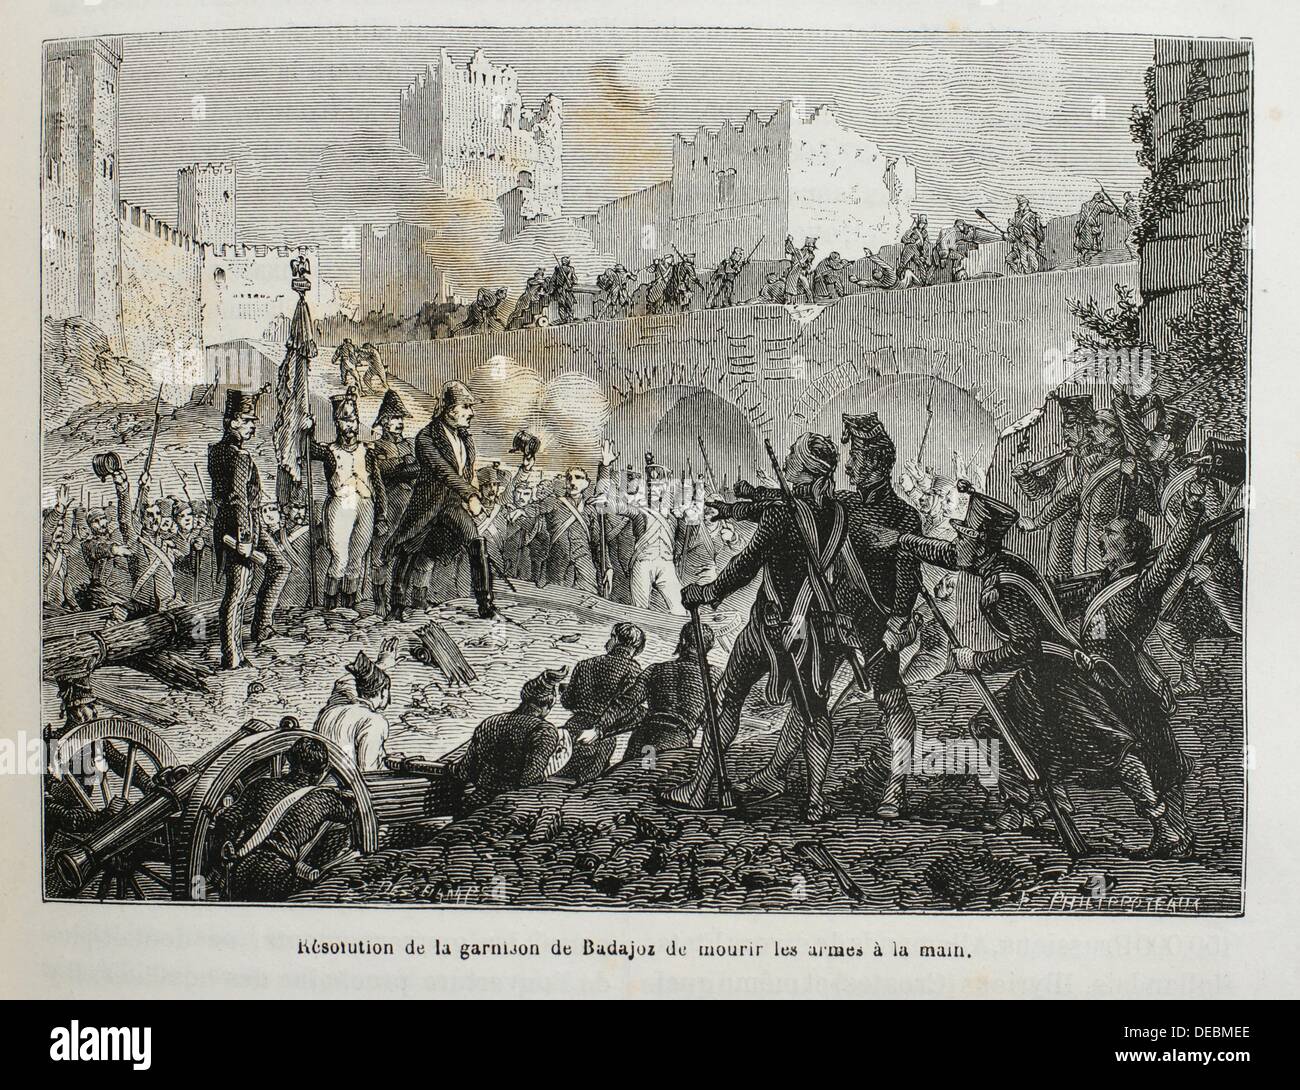 France, Spain-History-19th Century - resolution of the spanish army deciding not to surrender to the Napoleon troops, at Badajoz Stock Photo